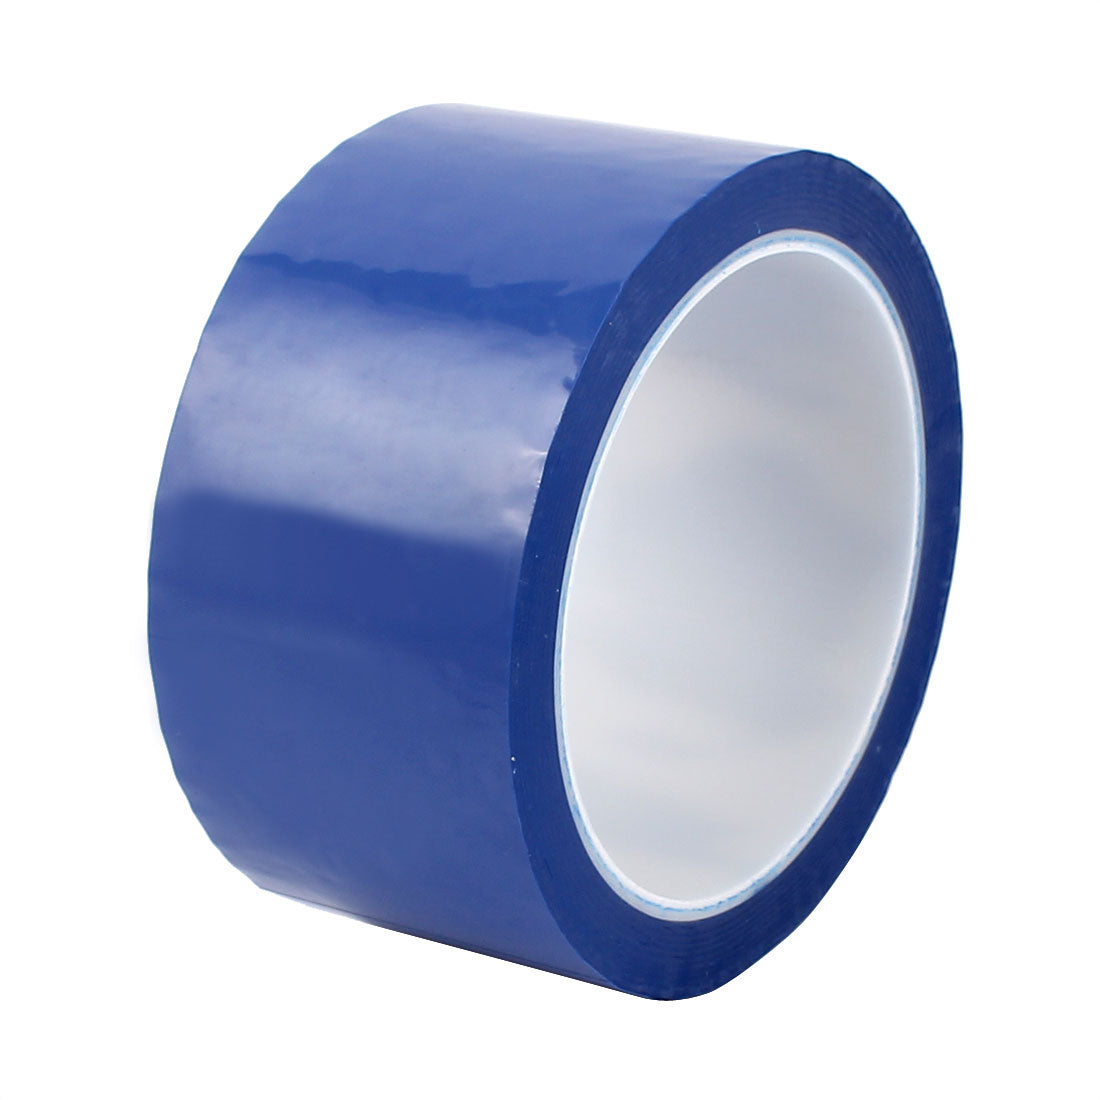 uxcell Uxcell 50mm Single Sided Strong Self Adhesive Mylar Tape 50M Length Blue